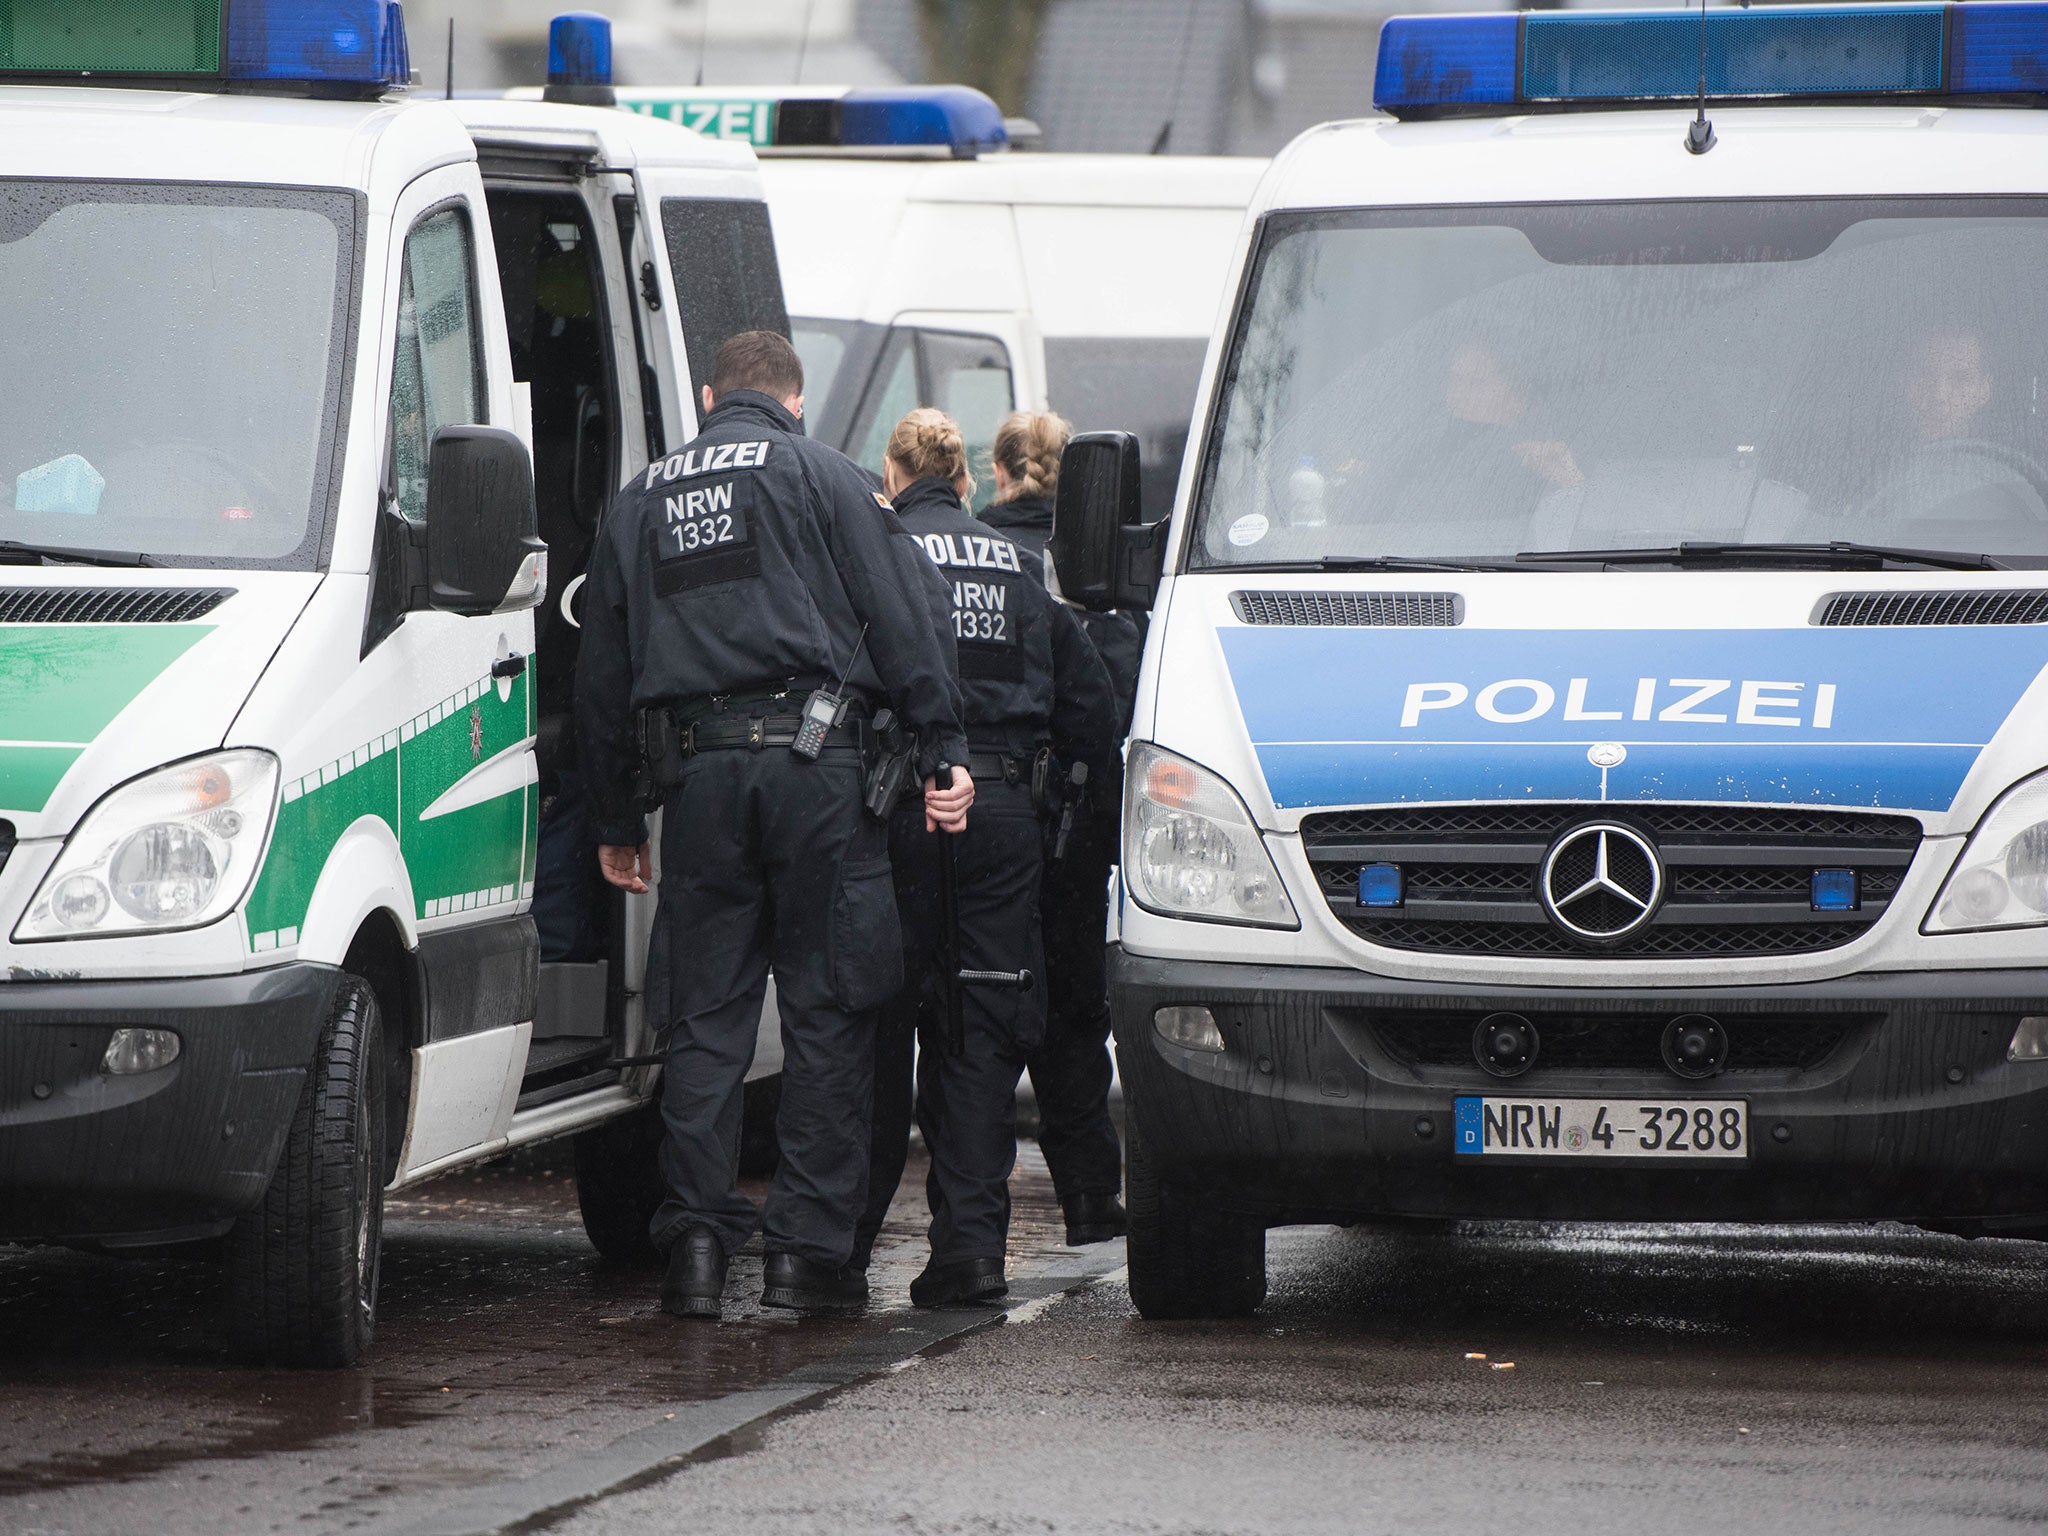 According to local media, German police are investigating the death as a homicide